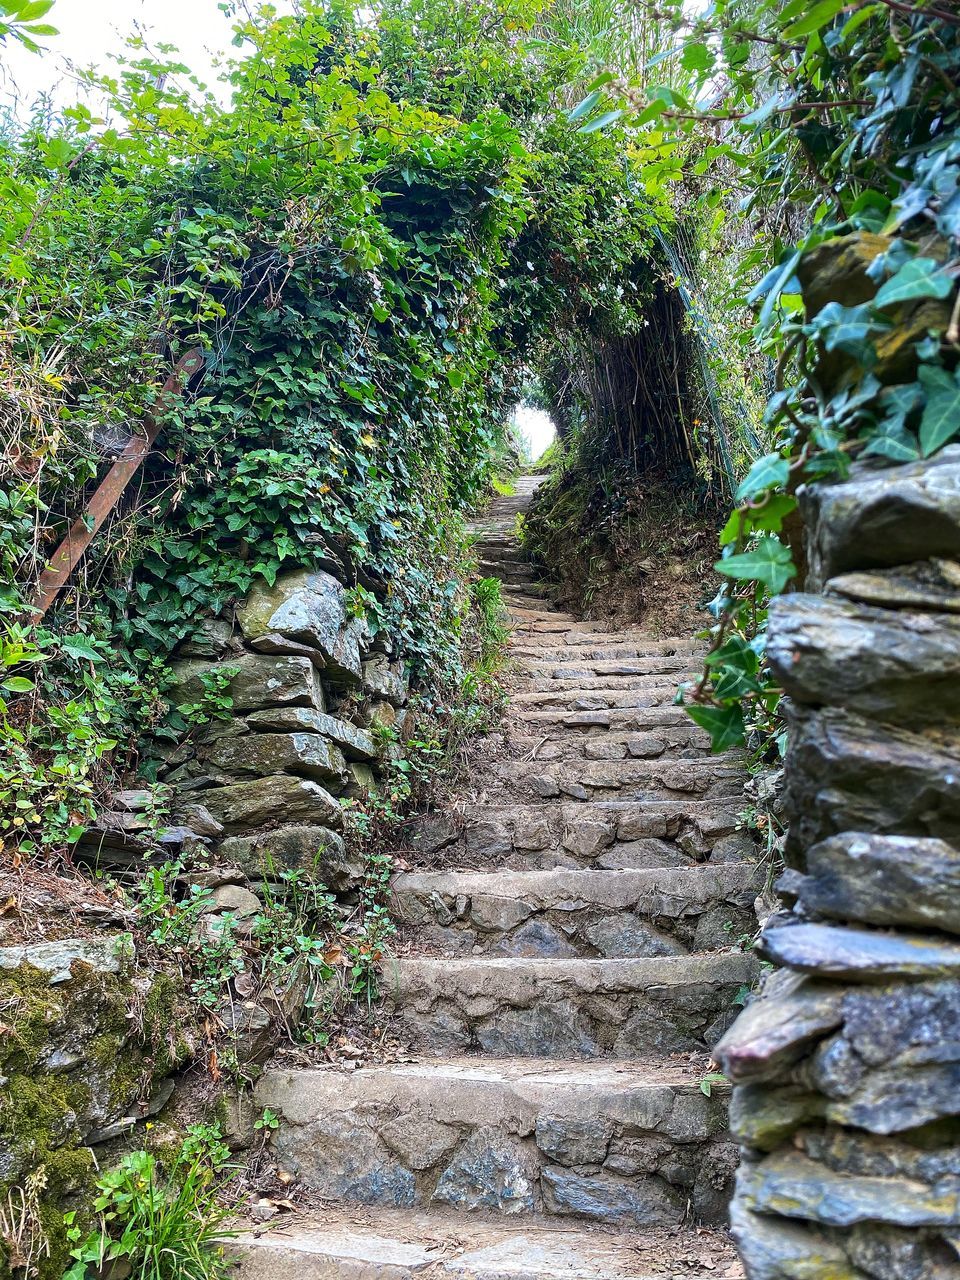 plant, the way forward, staircase, growth, tree, no people, garden, nature, day, steps and staircases, architecture, footpath, green, outdoors, tranquility, rock, woodland, beauty in nature, reef, forest, walkway, stone, land, built structure, stream, trail, tranquil scene, jungle